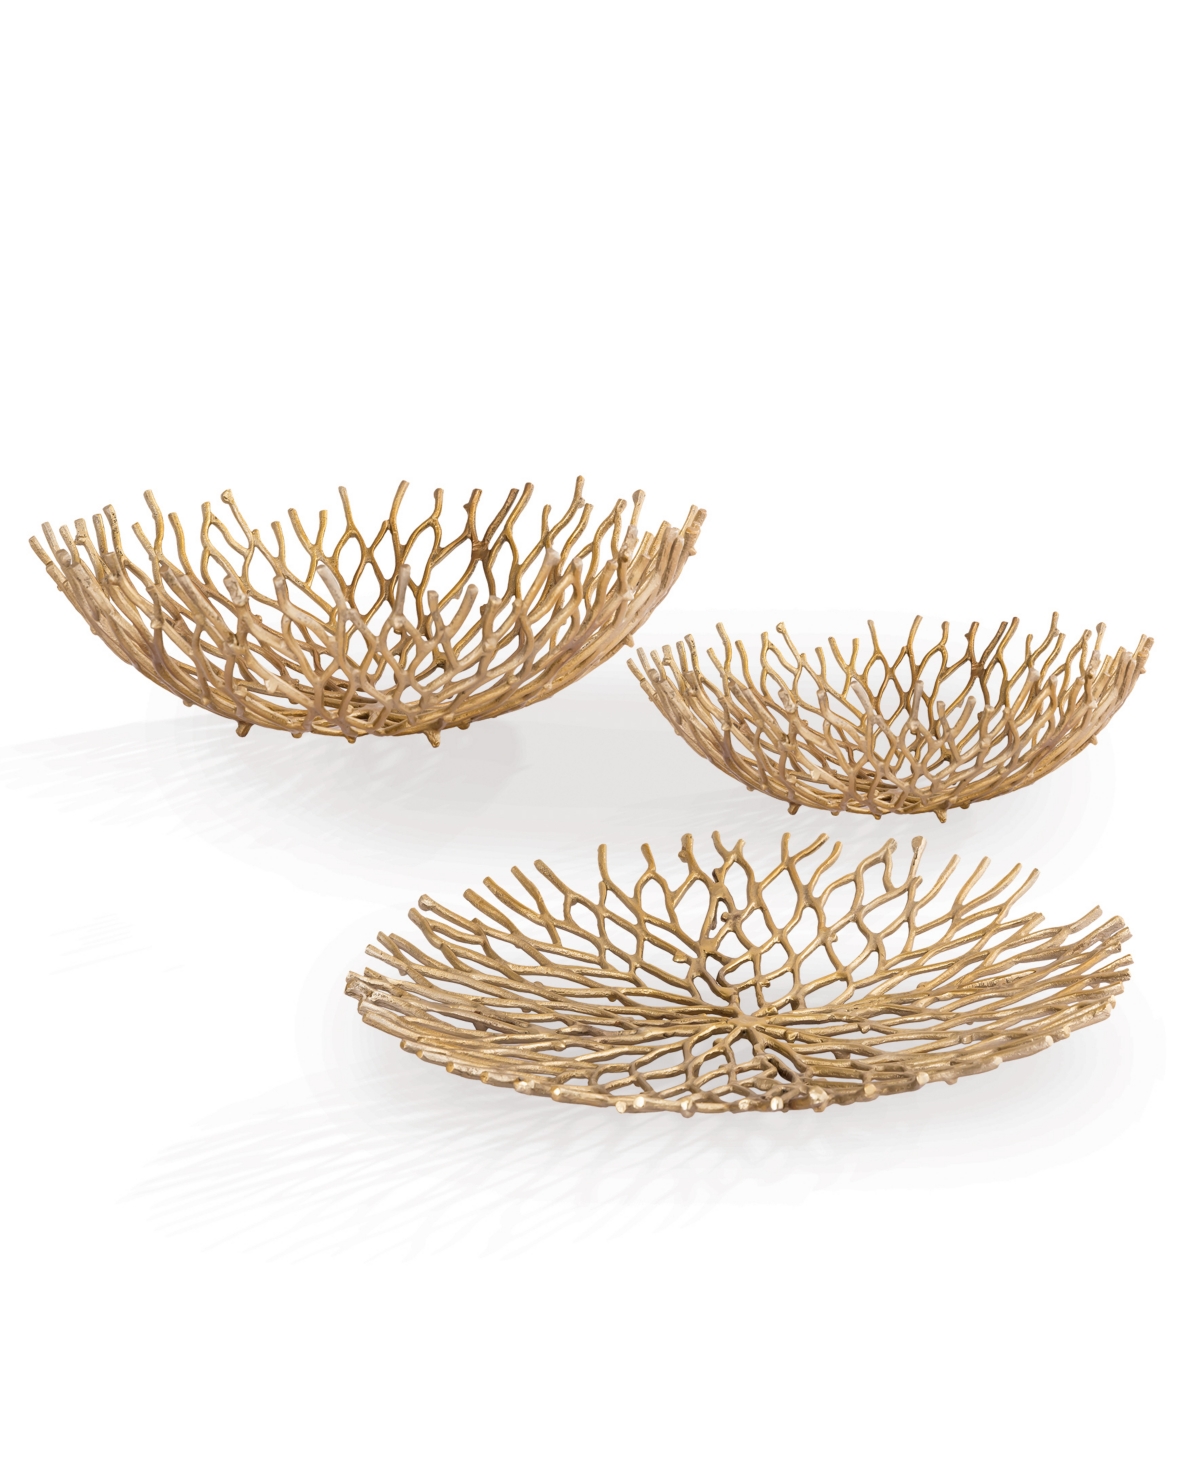 Coral Design Tray and Bowls, Set of 3 - Gold-Tone